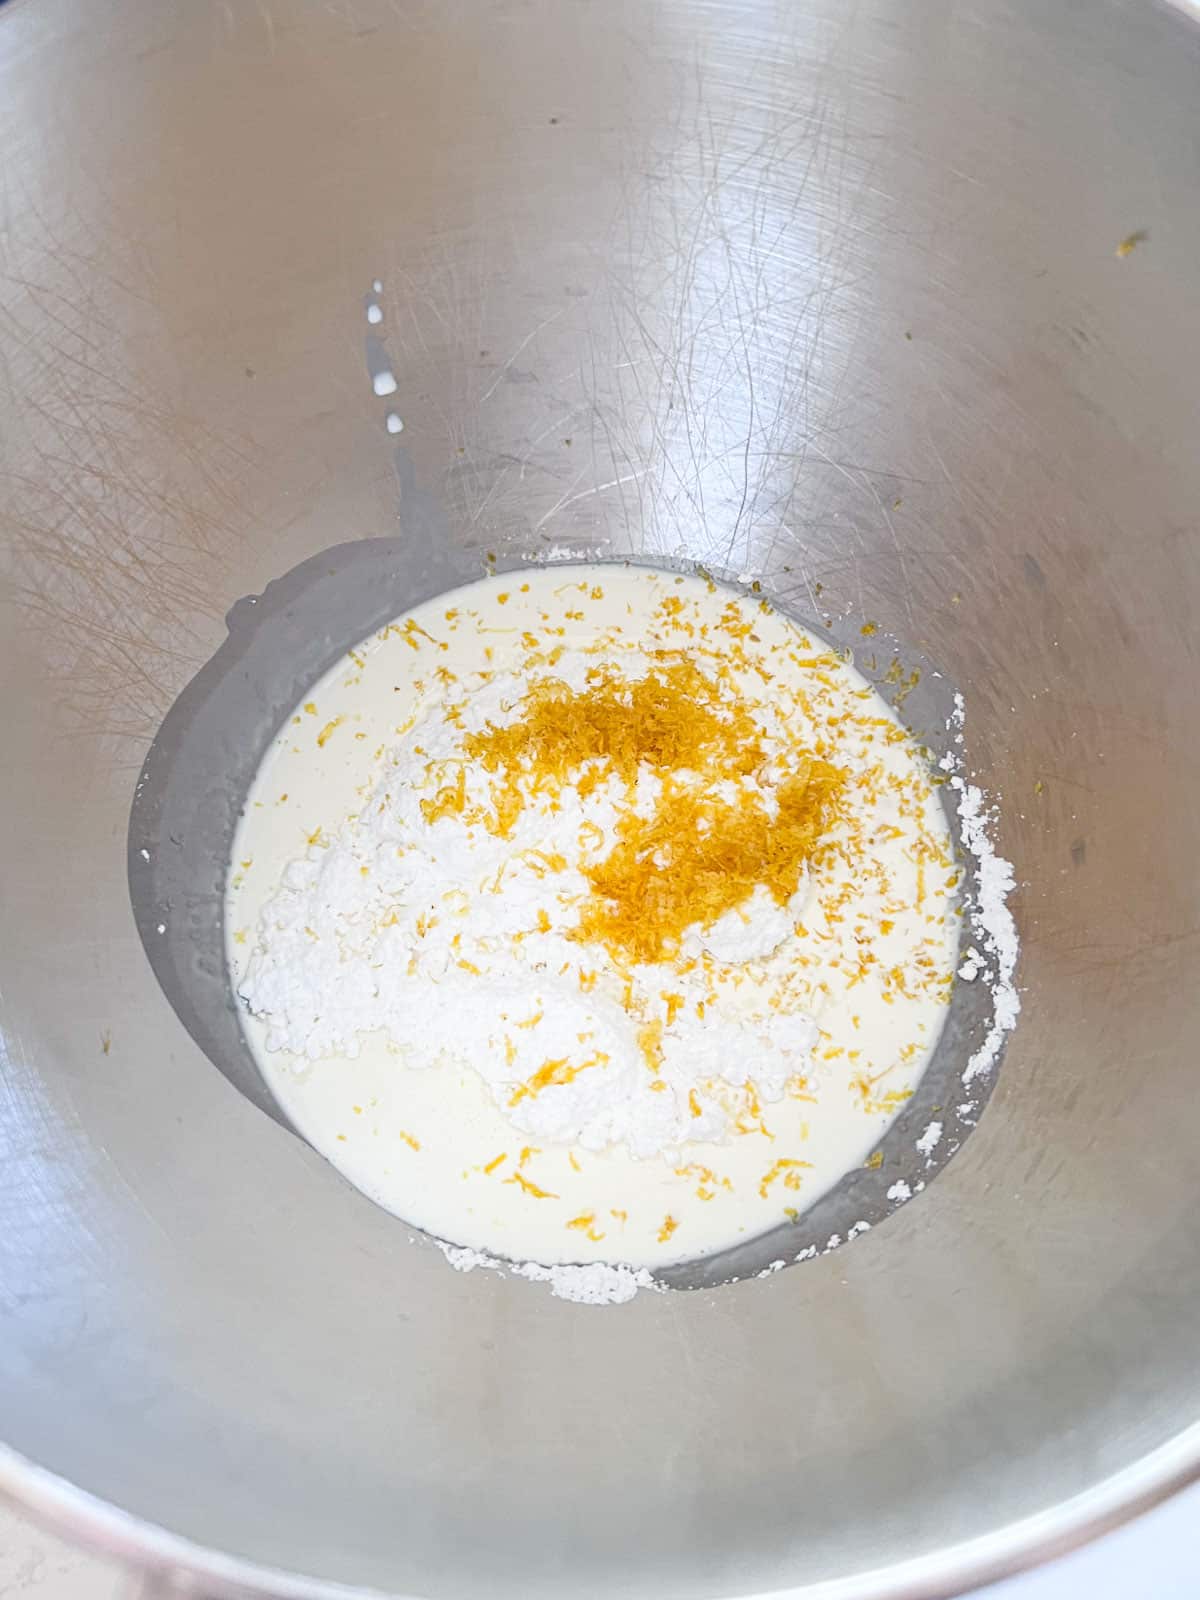 Whipped cream ingredients in the metal stand mixer bowl.